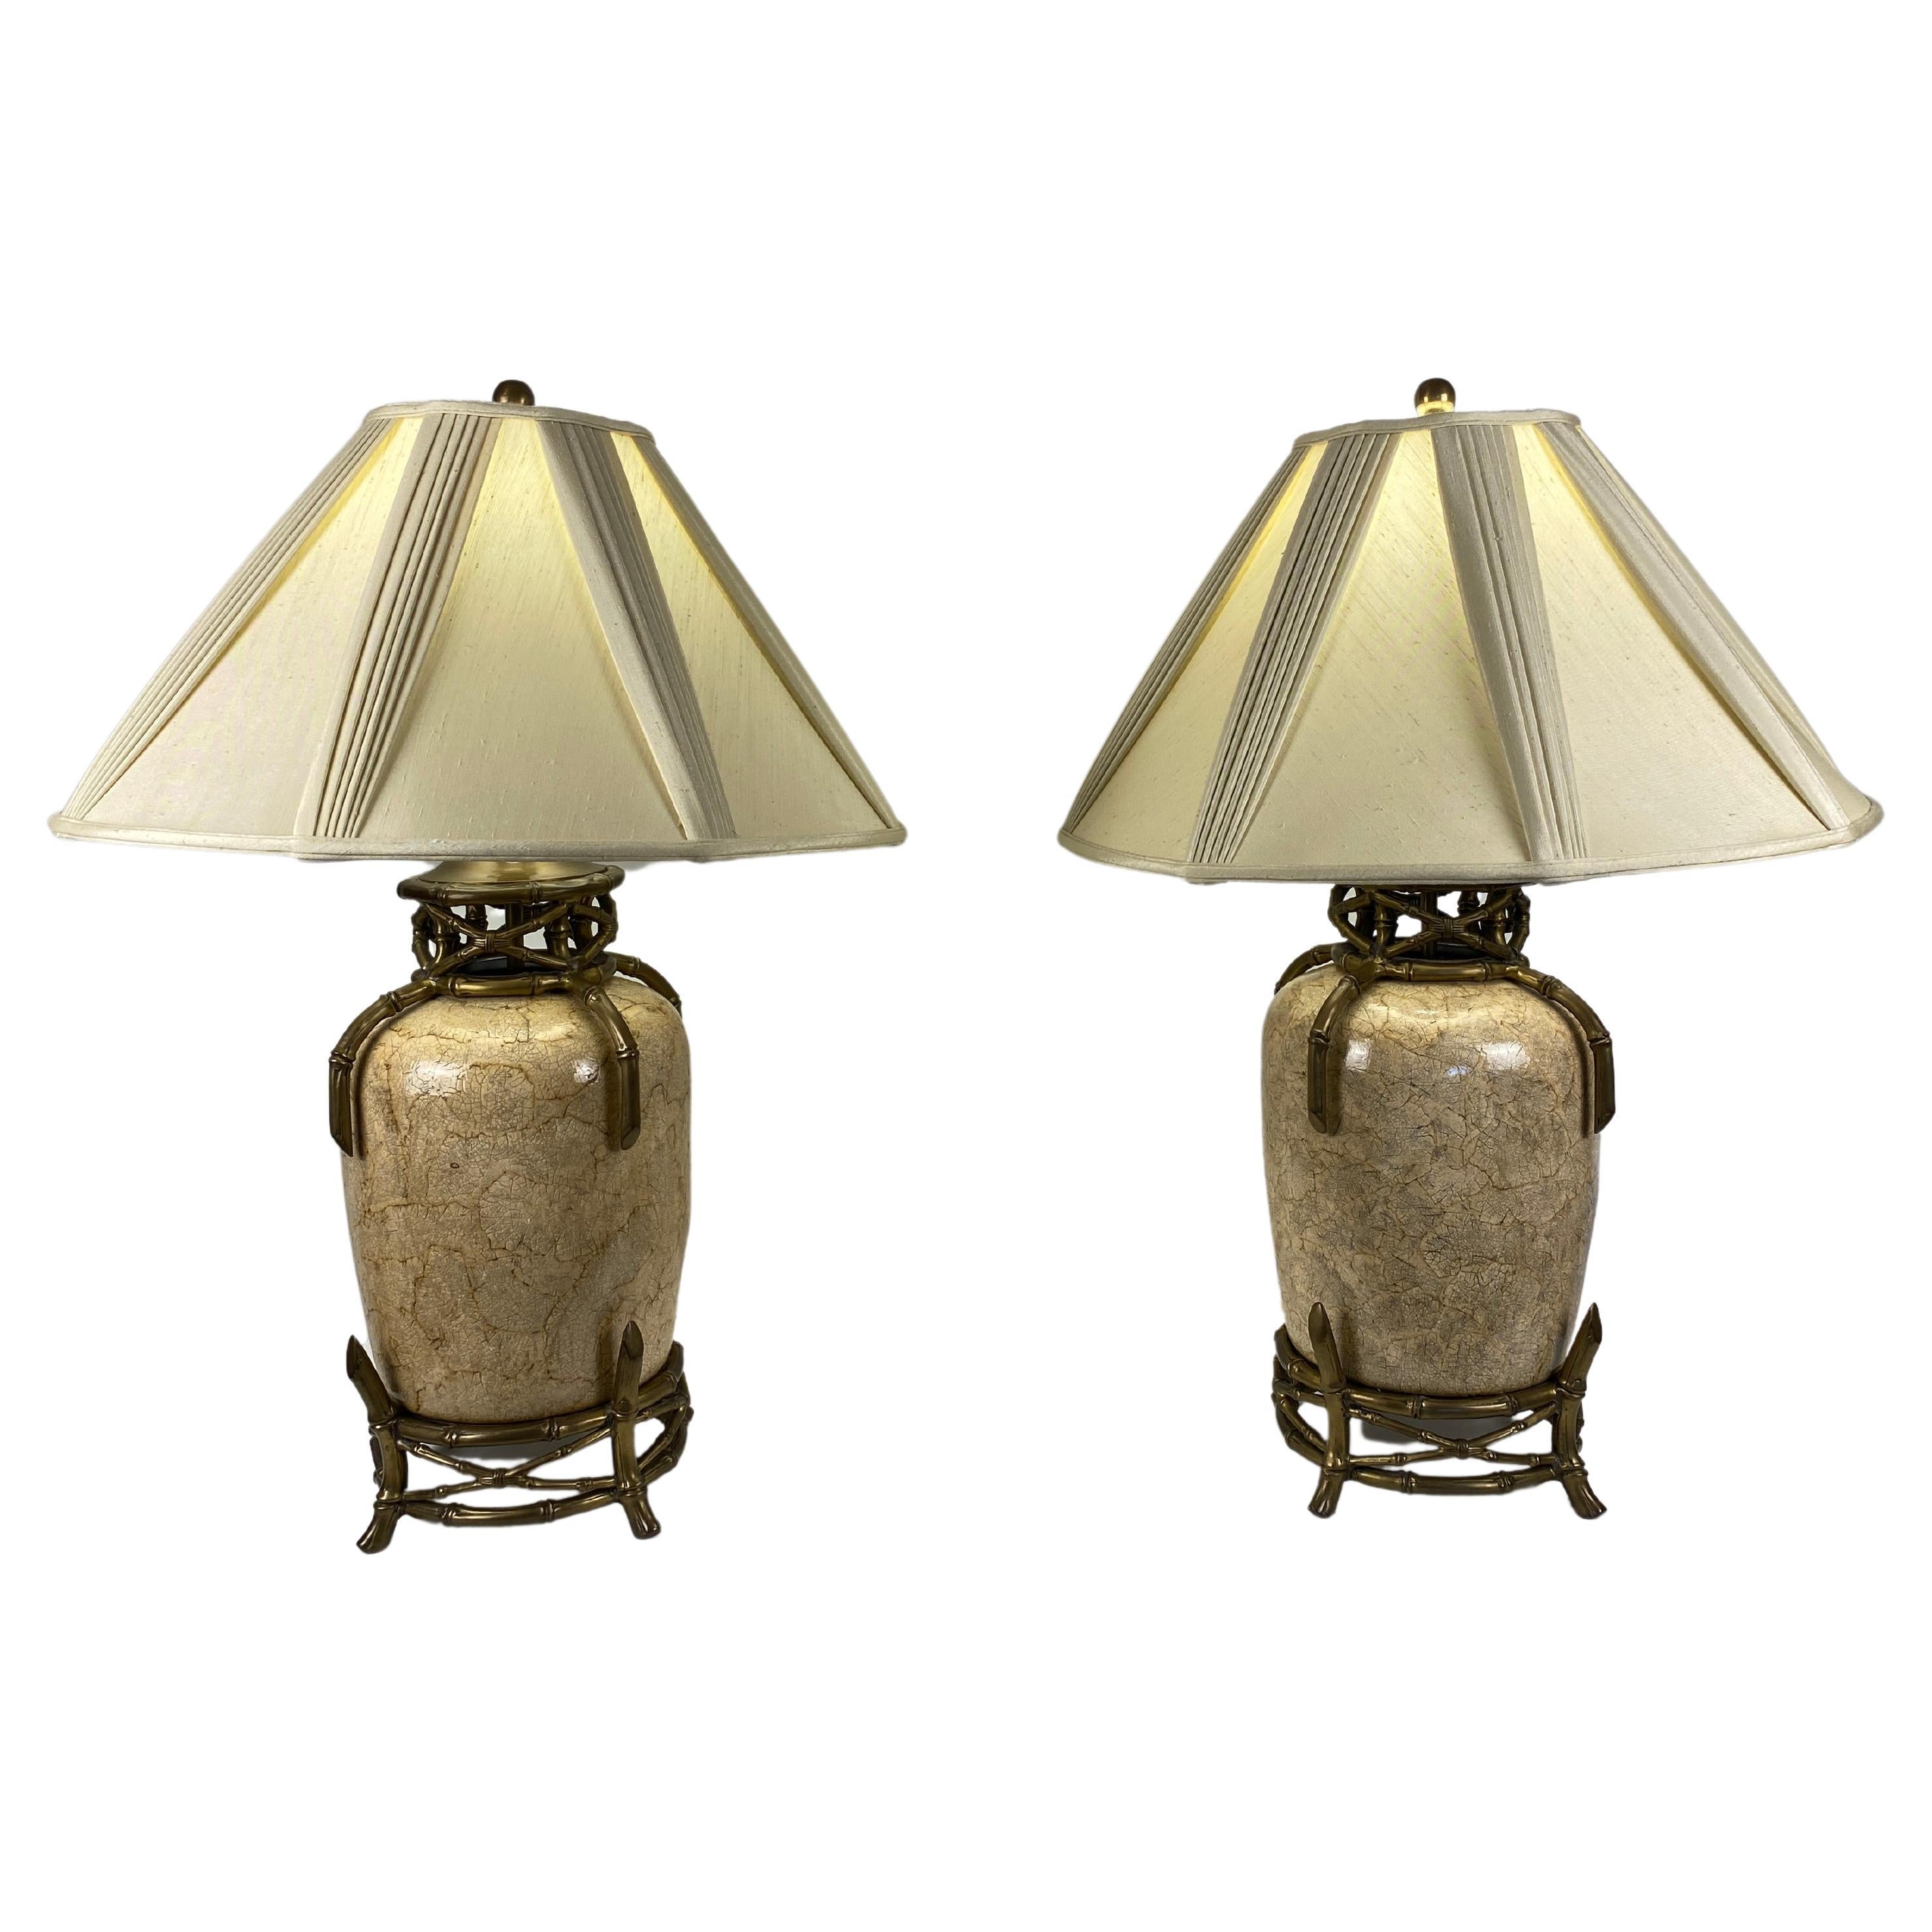 Pair of Ceramic Table Lamps with Faux Bamboo Brass Details